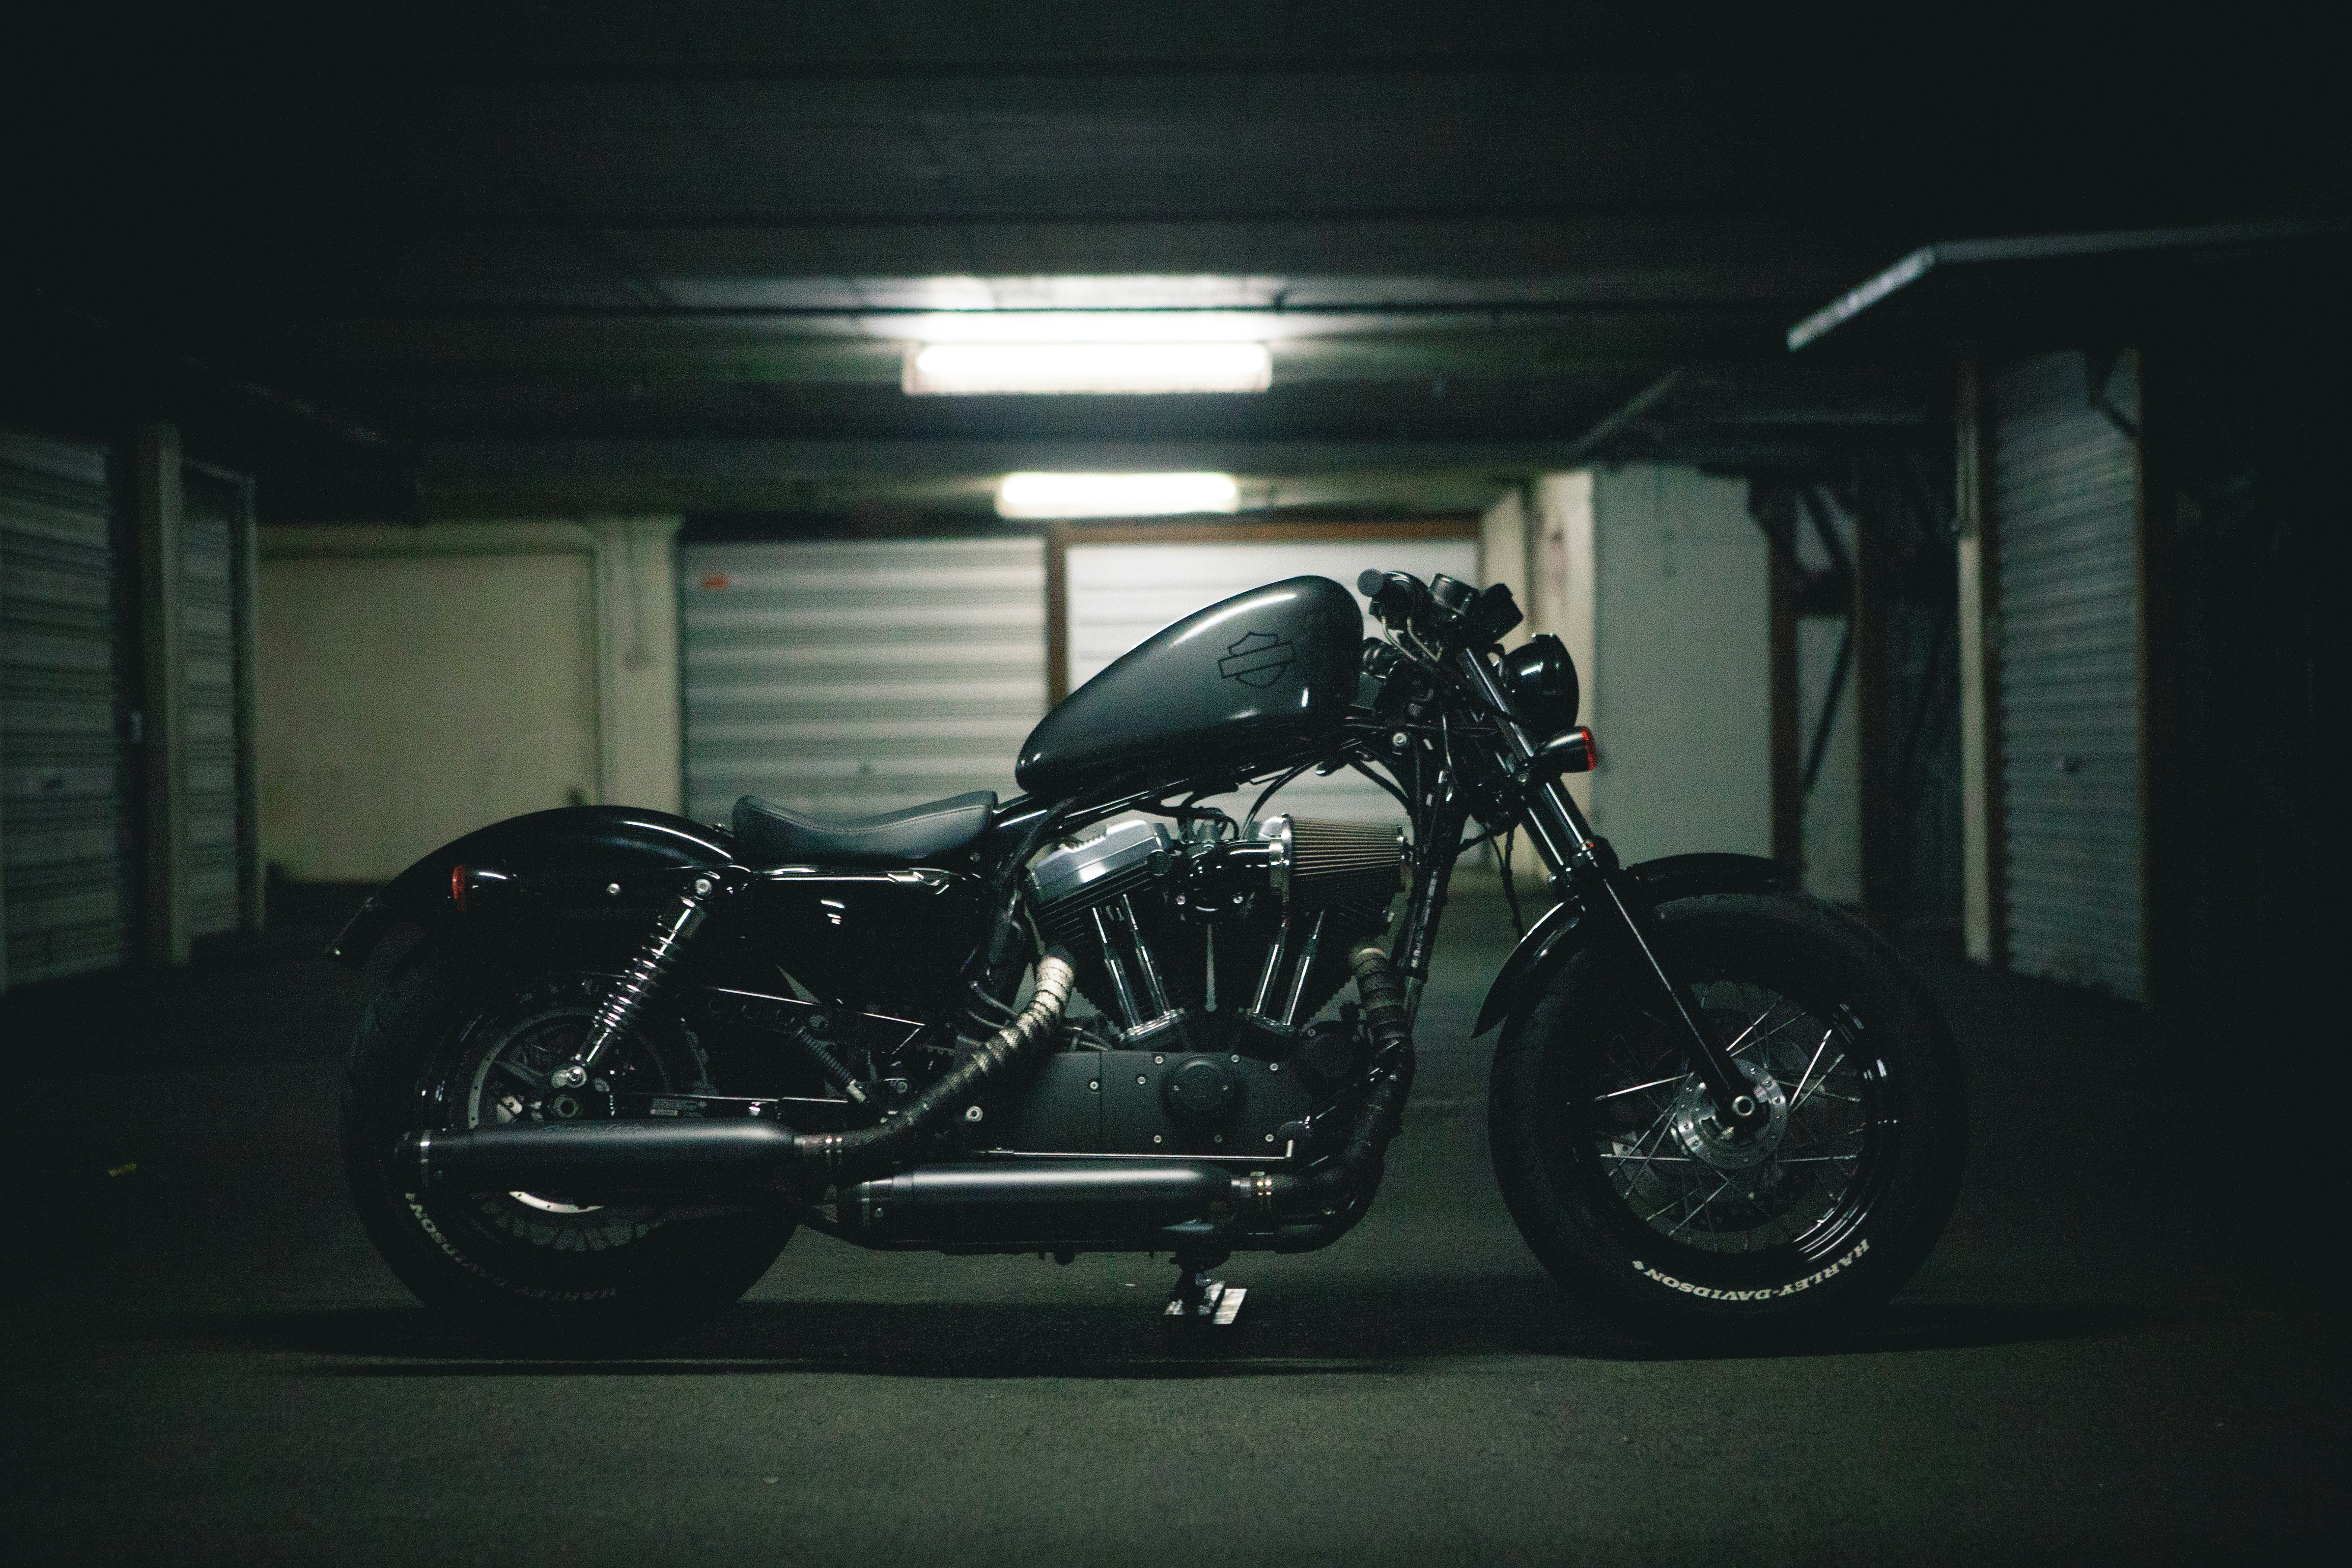 A shot of my old Harley from 2015 when I lived in Australia. I miss this bike every day!